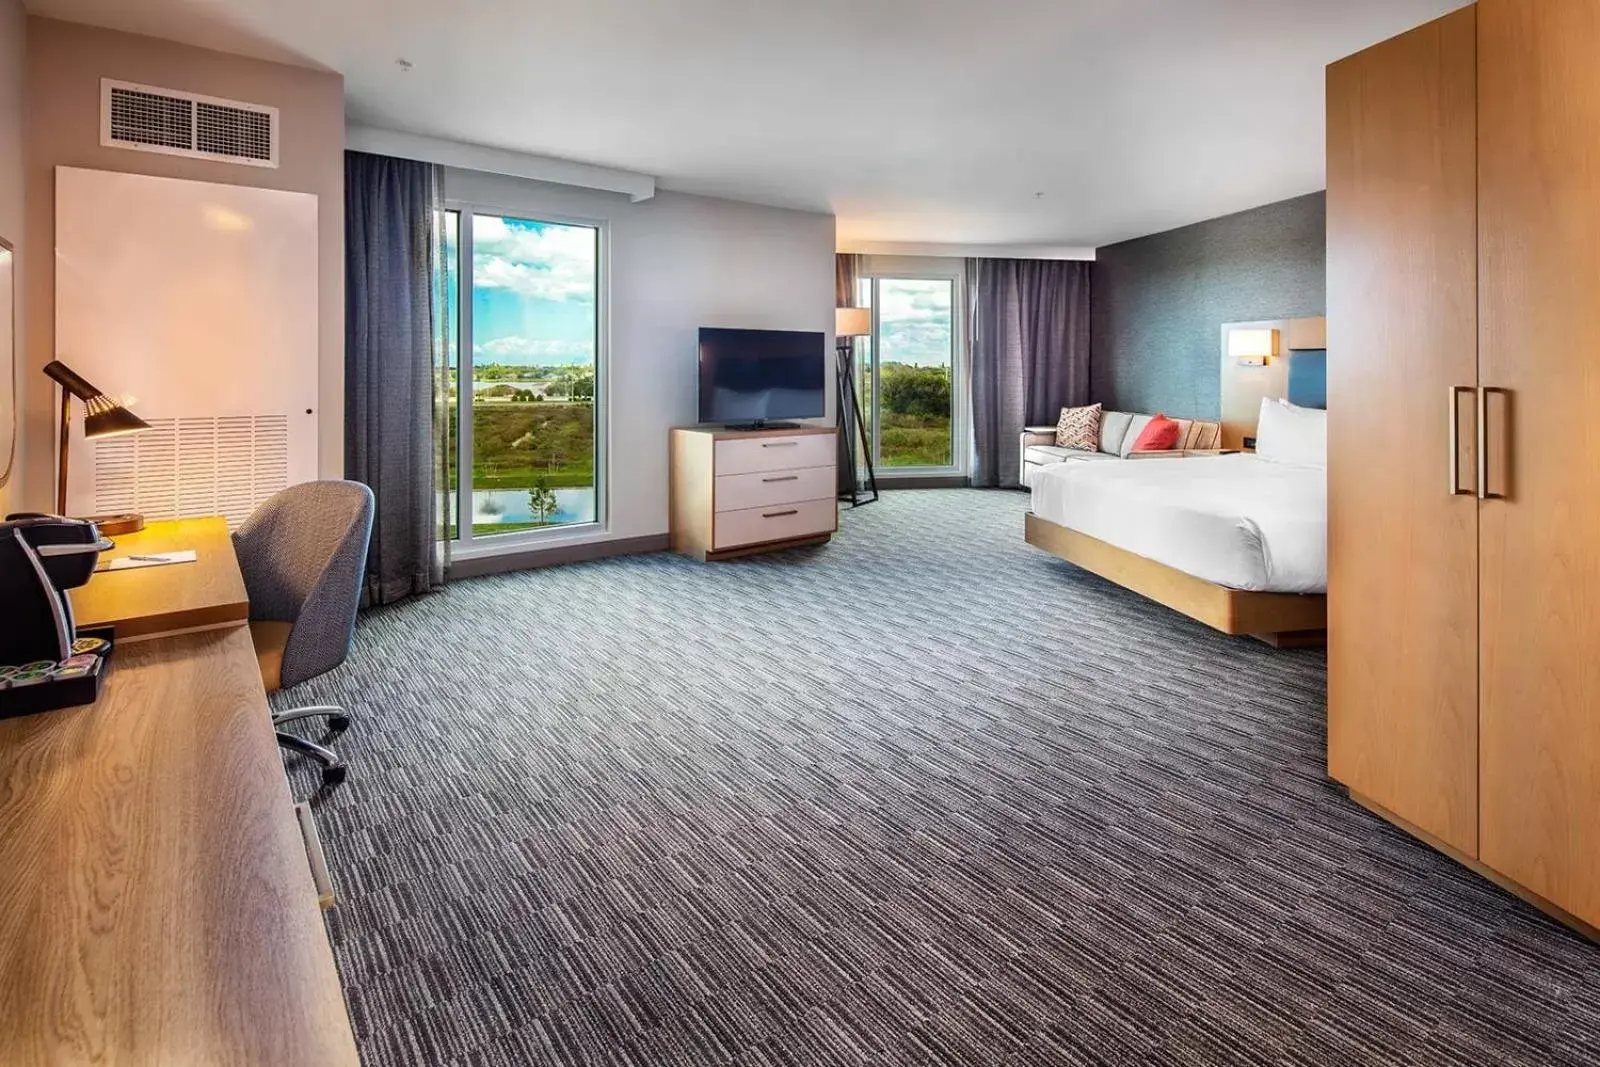 Deluxe King Room in Legacy Hotel at IMG Academy